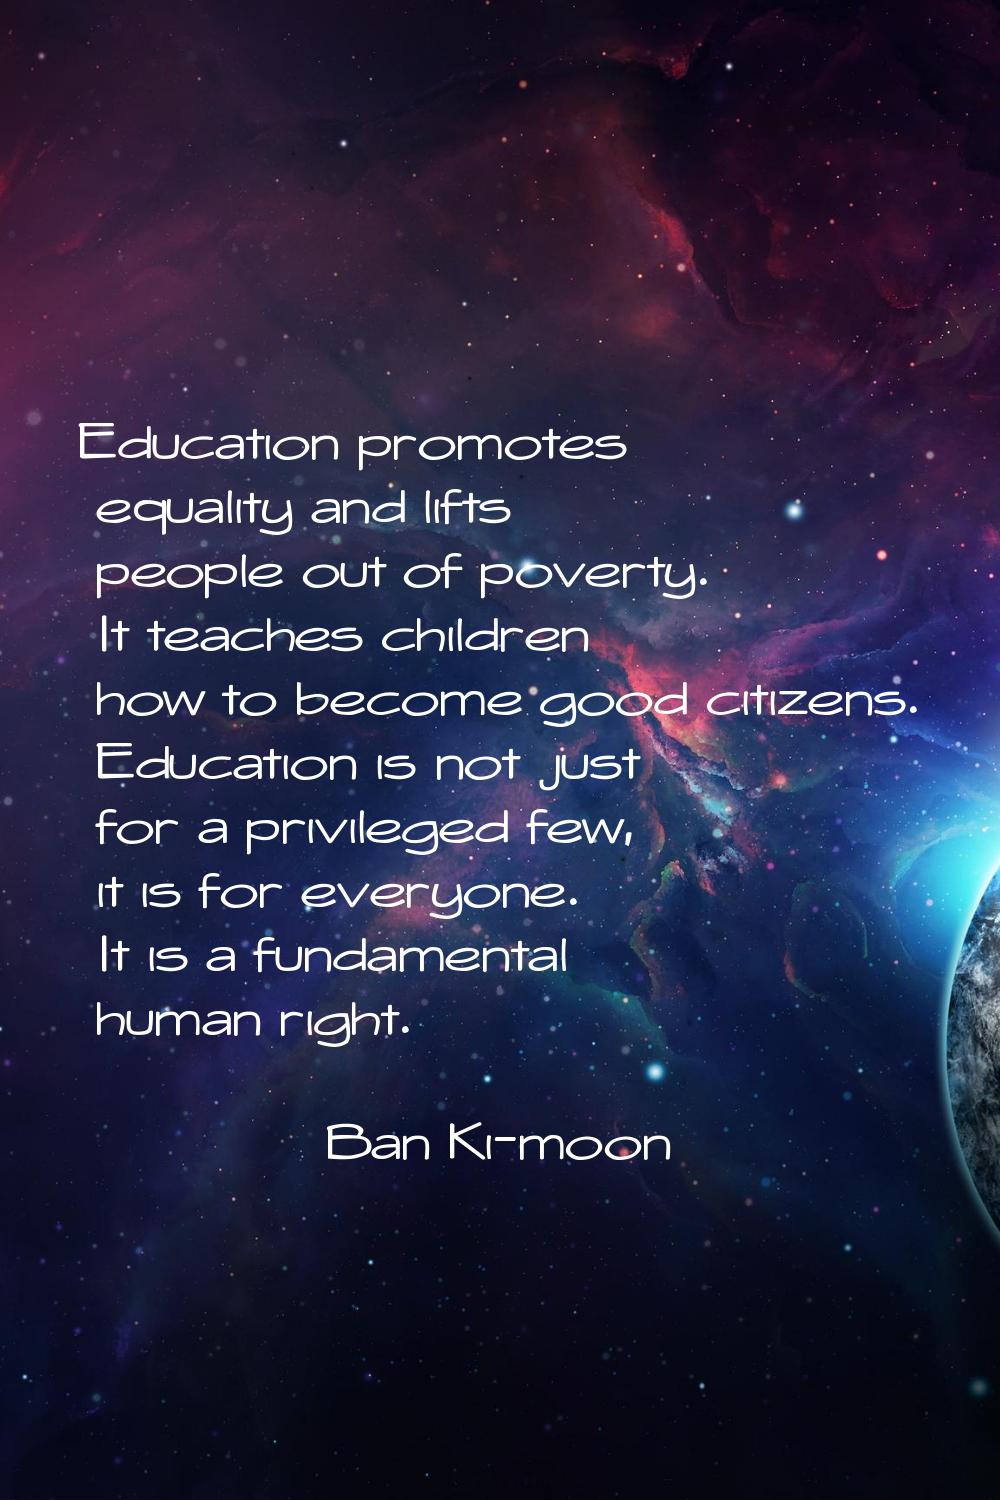 Education promotes equality and lifts people out of poverty. It teaches children how to become good